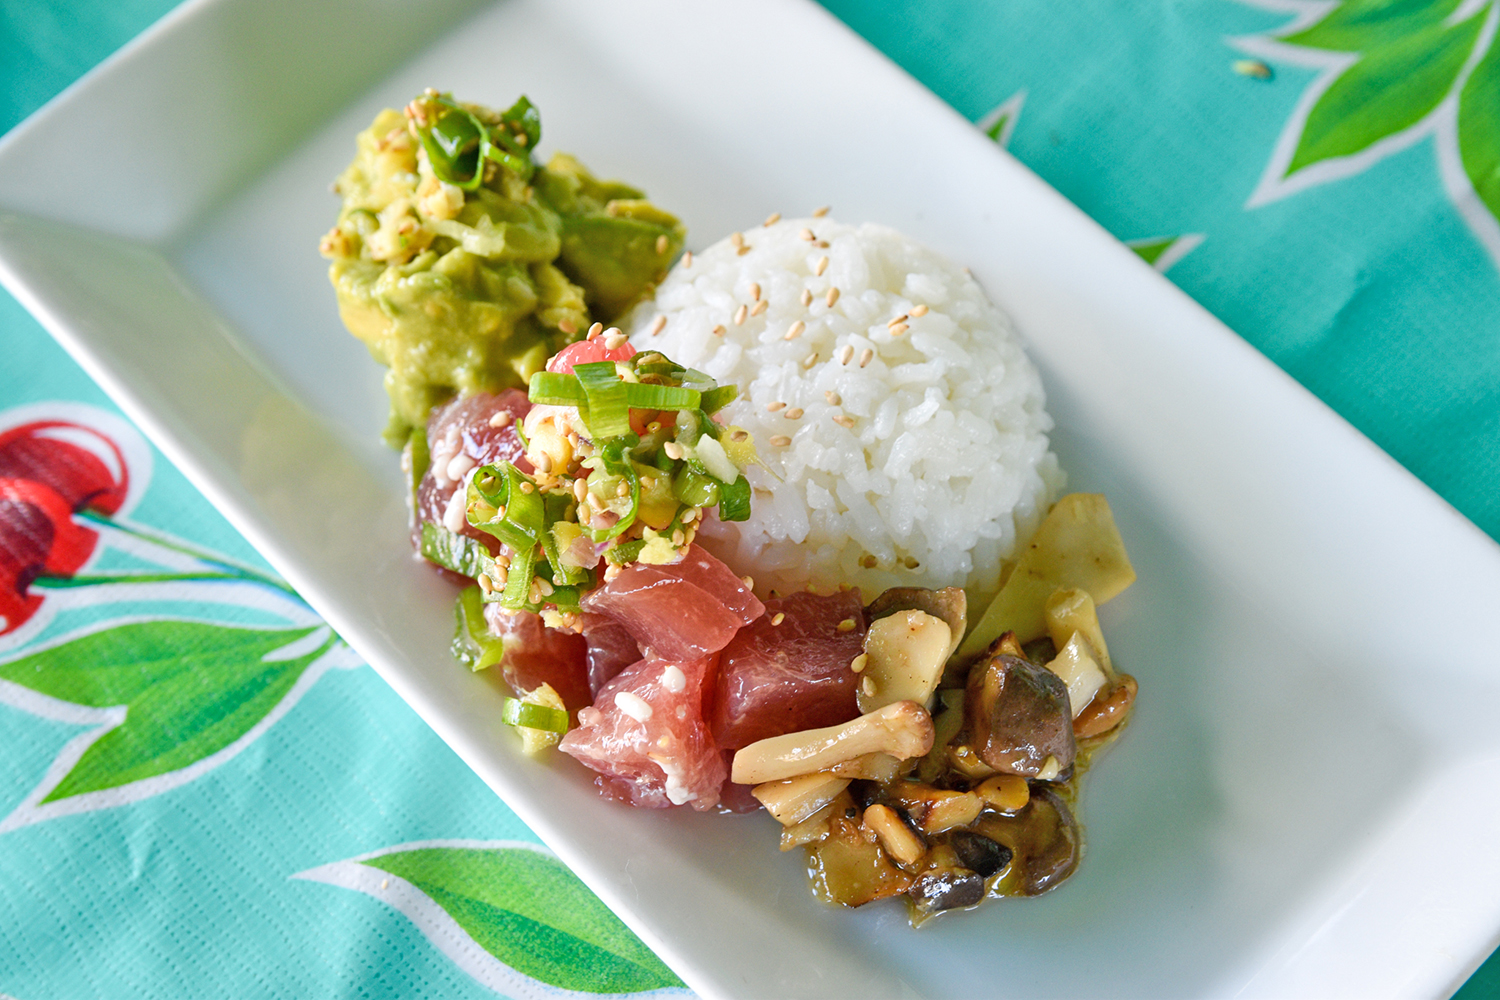 A dish with avocado, tuna poke, sauted mushrooms, and a mound of white rice.